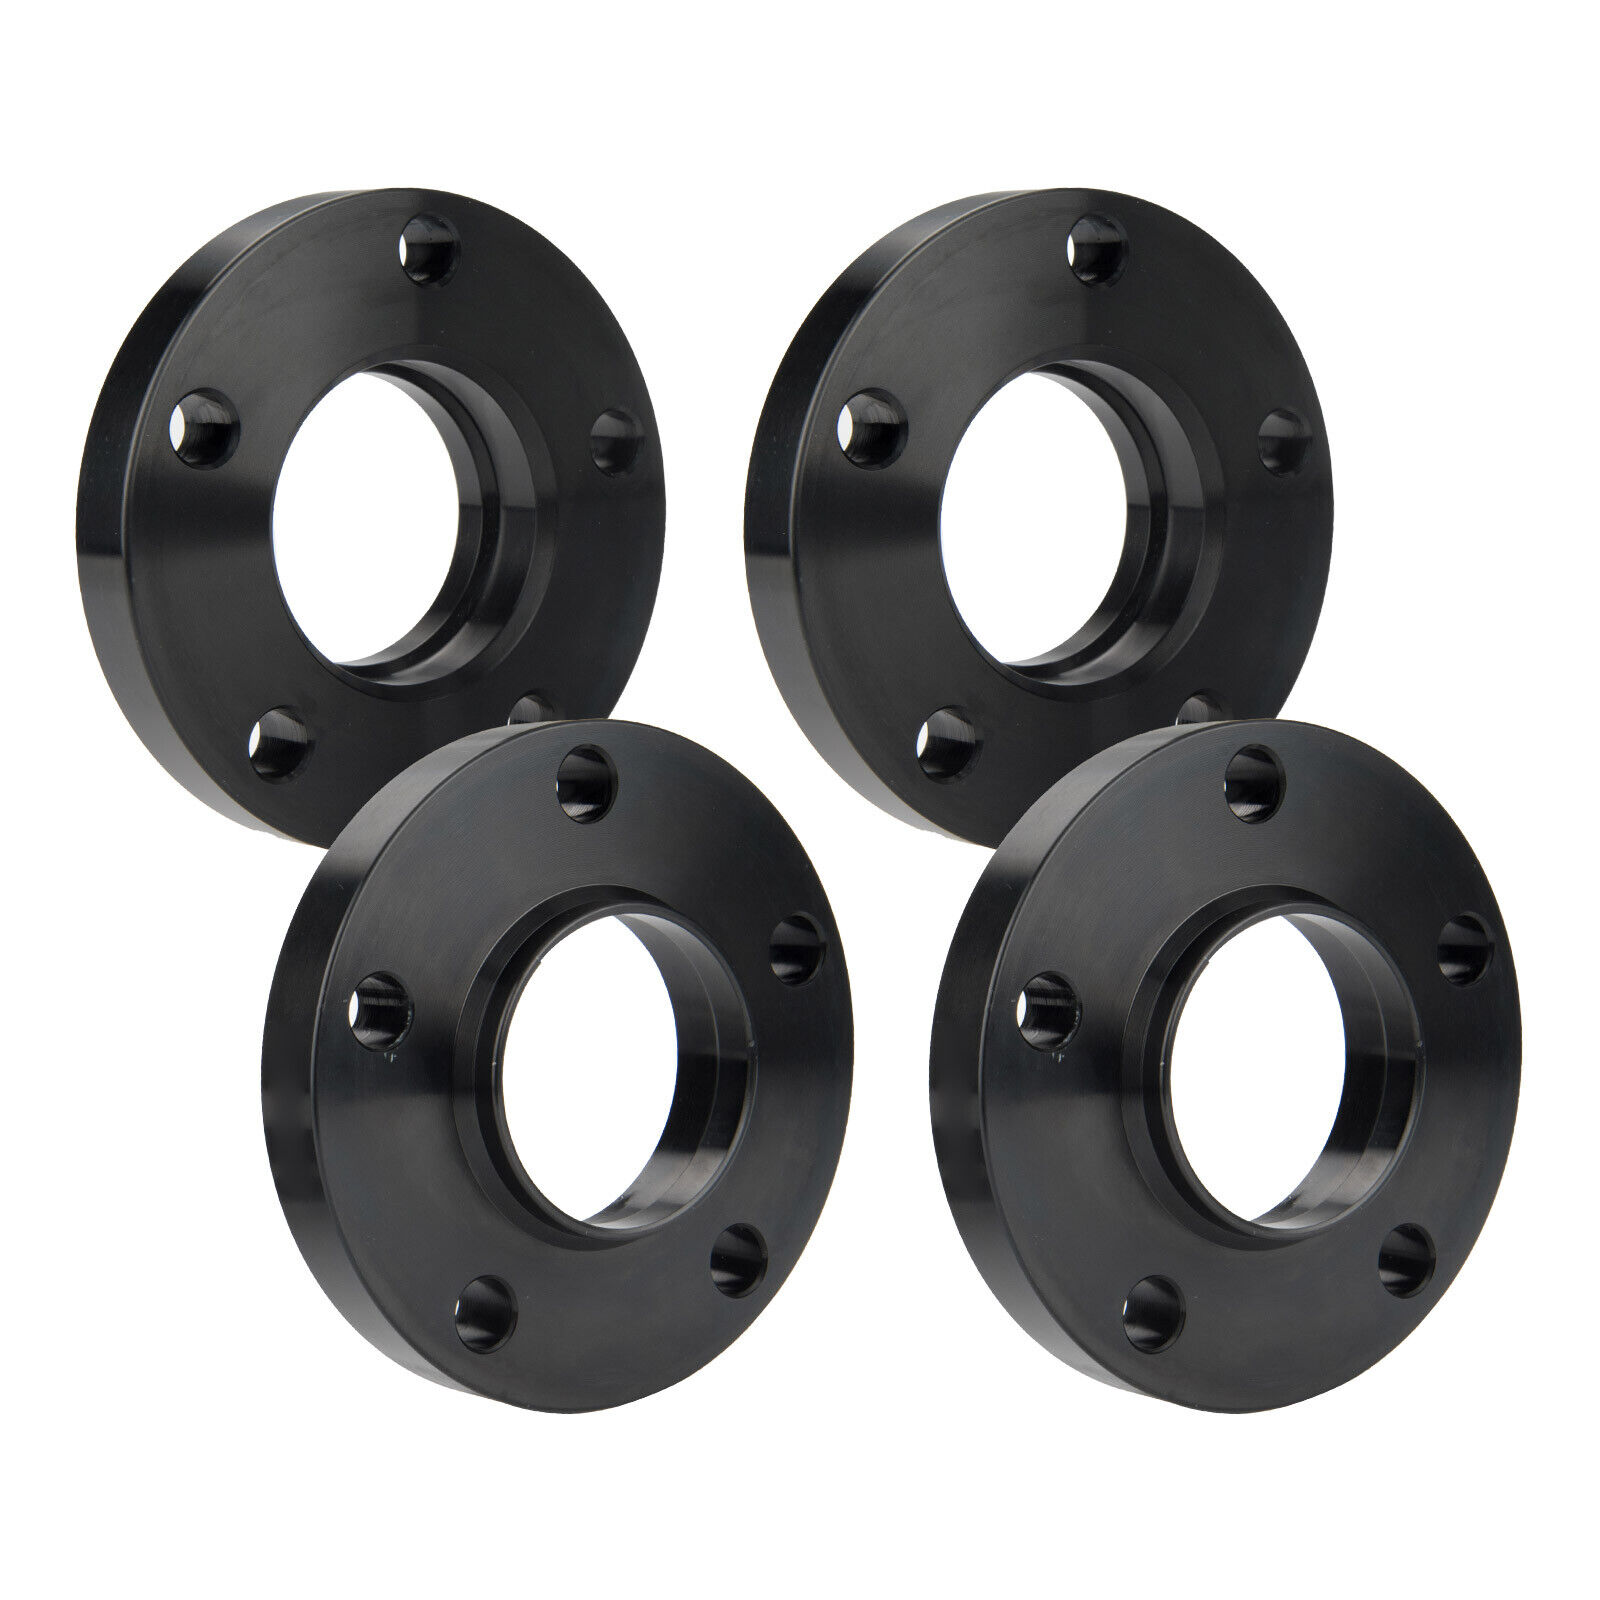 5x120 Staggered Wheel Spacers Kit (2) 15mm & (2) 20mm For BMW 318i 316i 525i M3